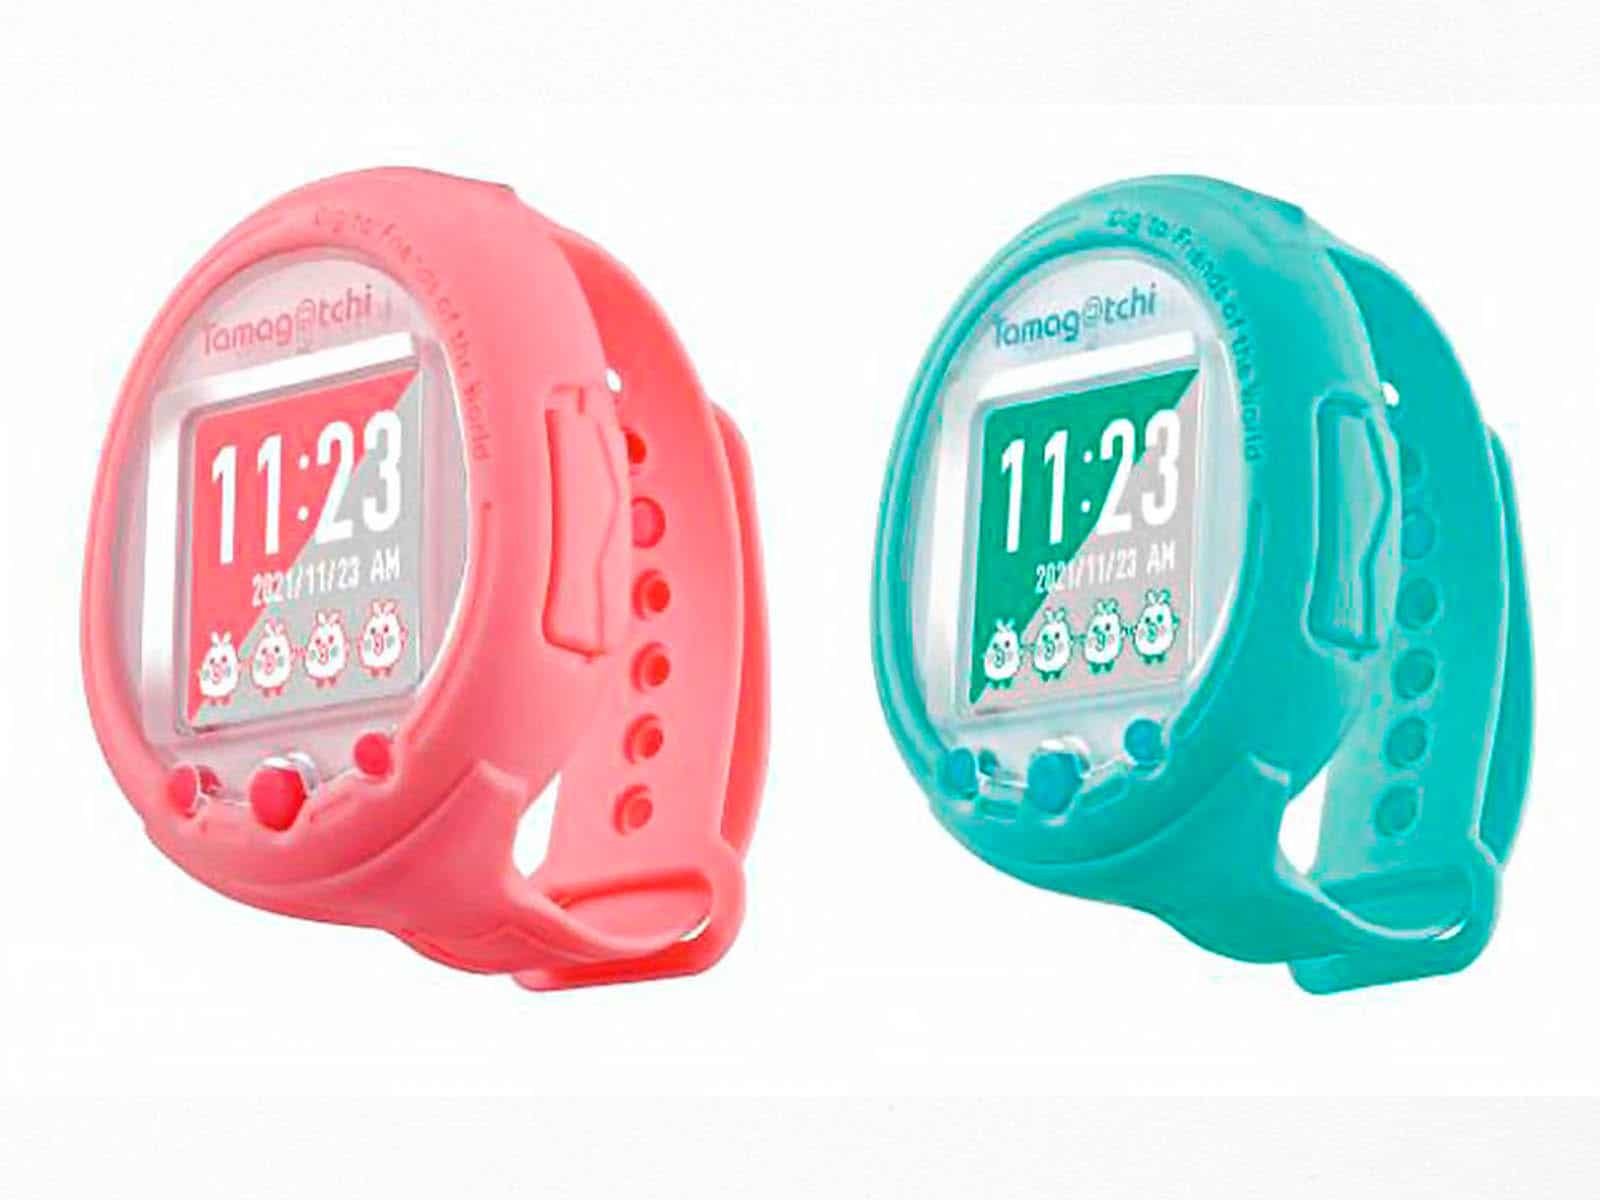 If you’re a child of the 90s, you’re in luck: the Tamagotchi is back